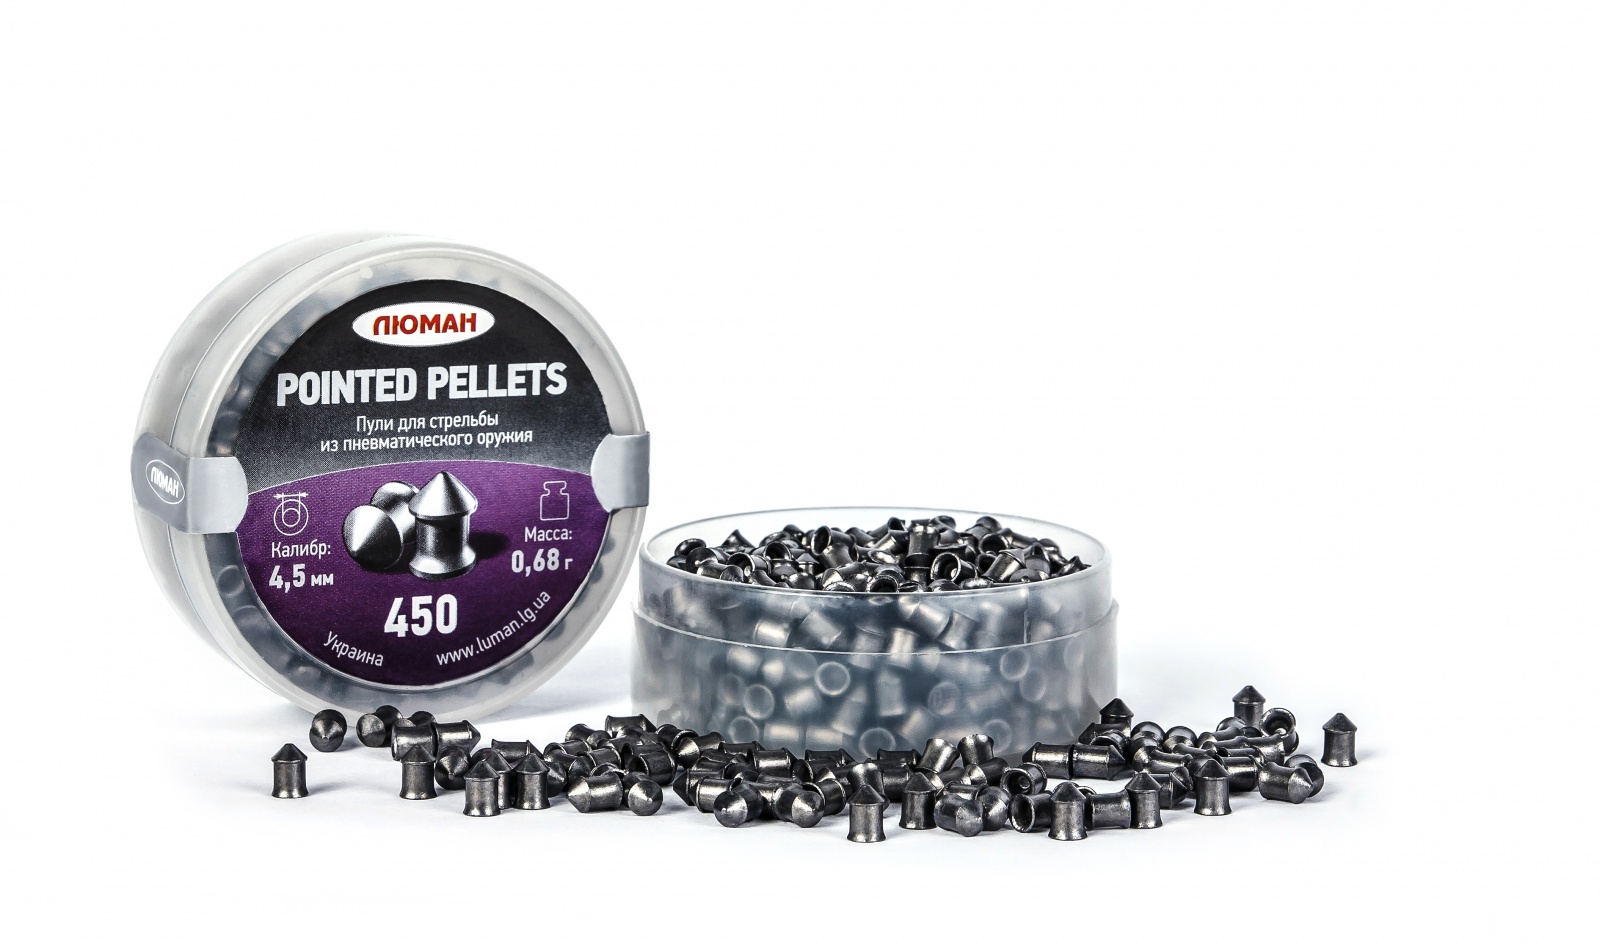  "" Pointed pellets 4,5 0,68. (450) 